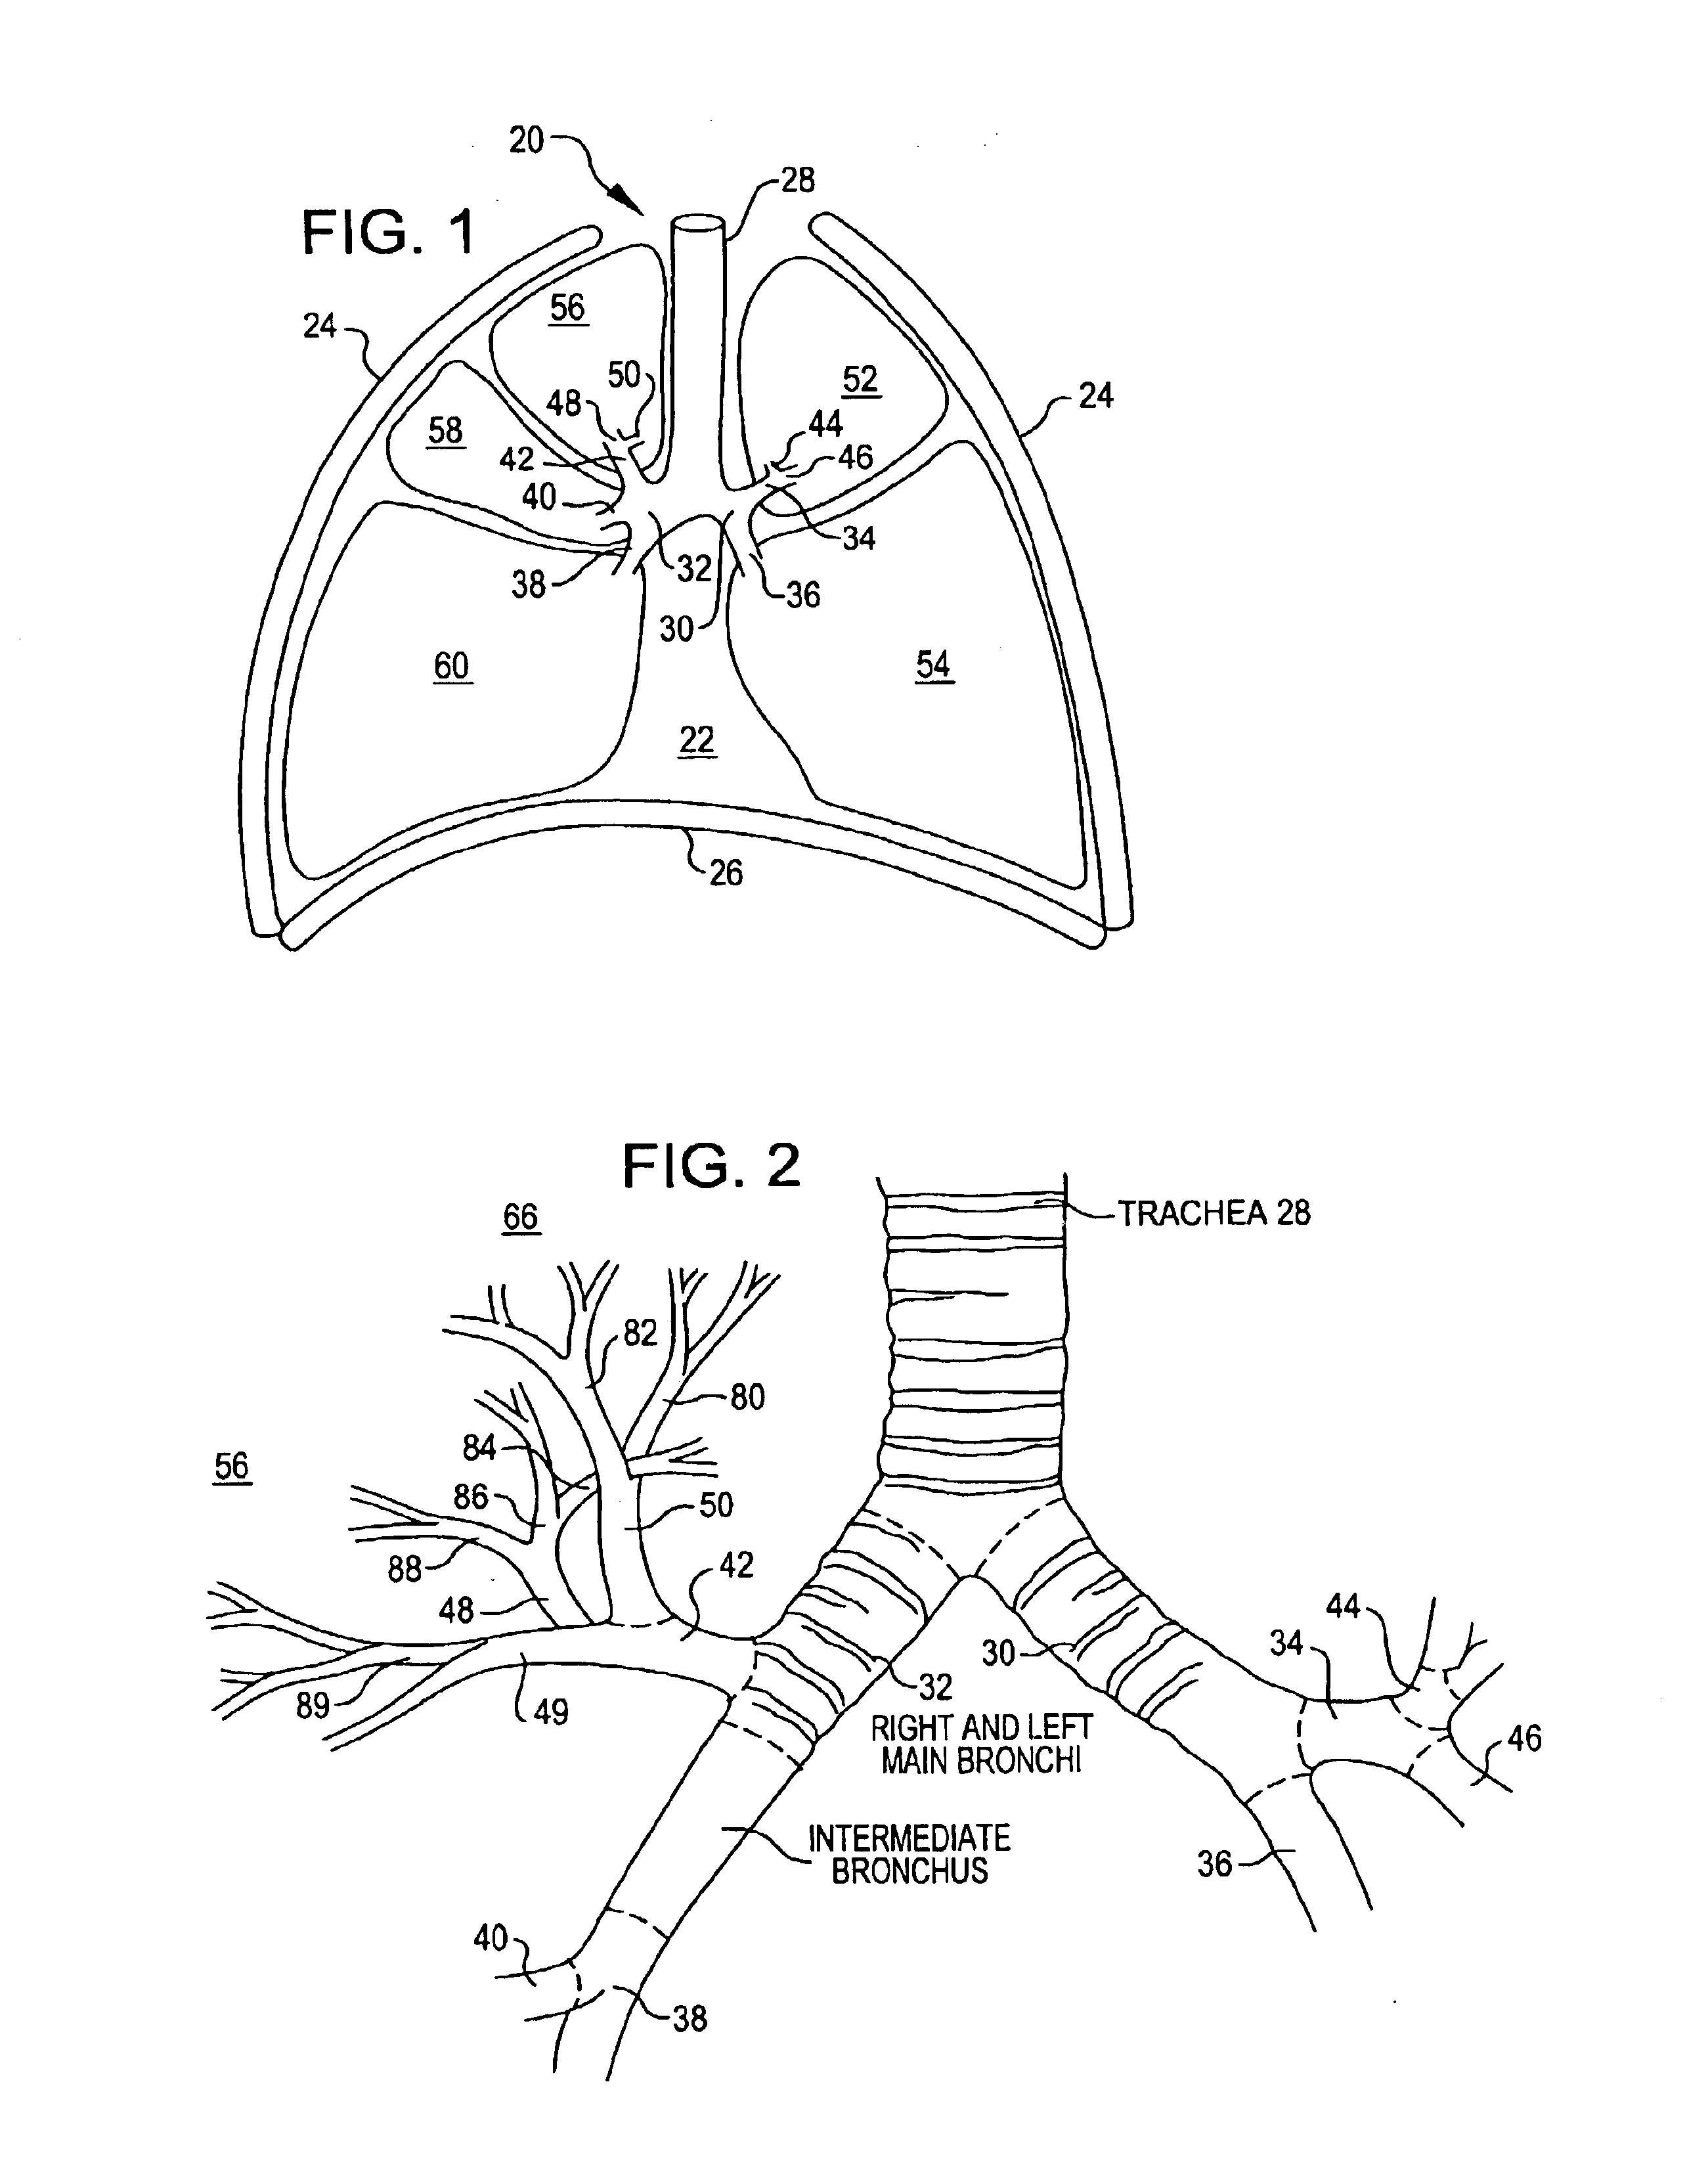 Device and method for intra-bronchial provision of a therapeutic agent